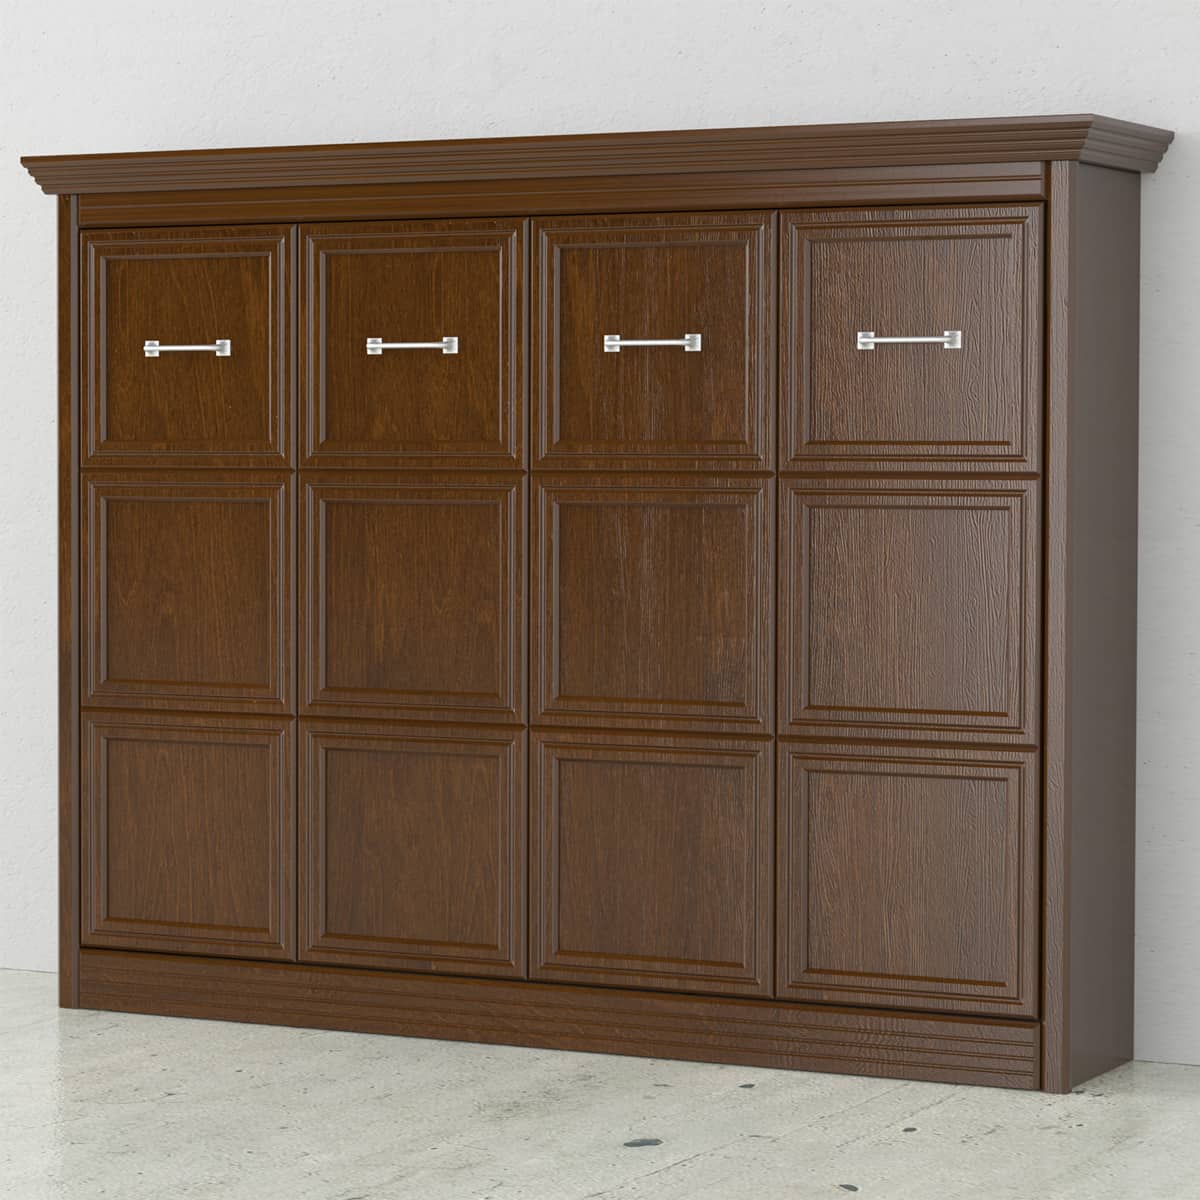 chamberlin full horizontal murphy bed cabinet closed console hidden hideaway hide away hide-a-way diy murphy bed kit fold out pull down wall bed cabinet guest bed